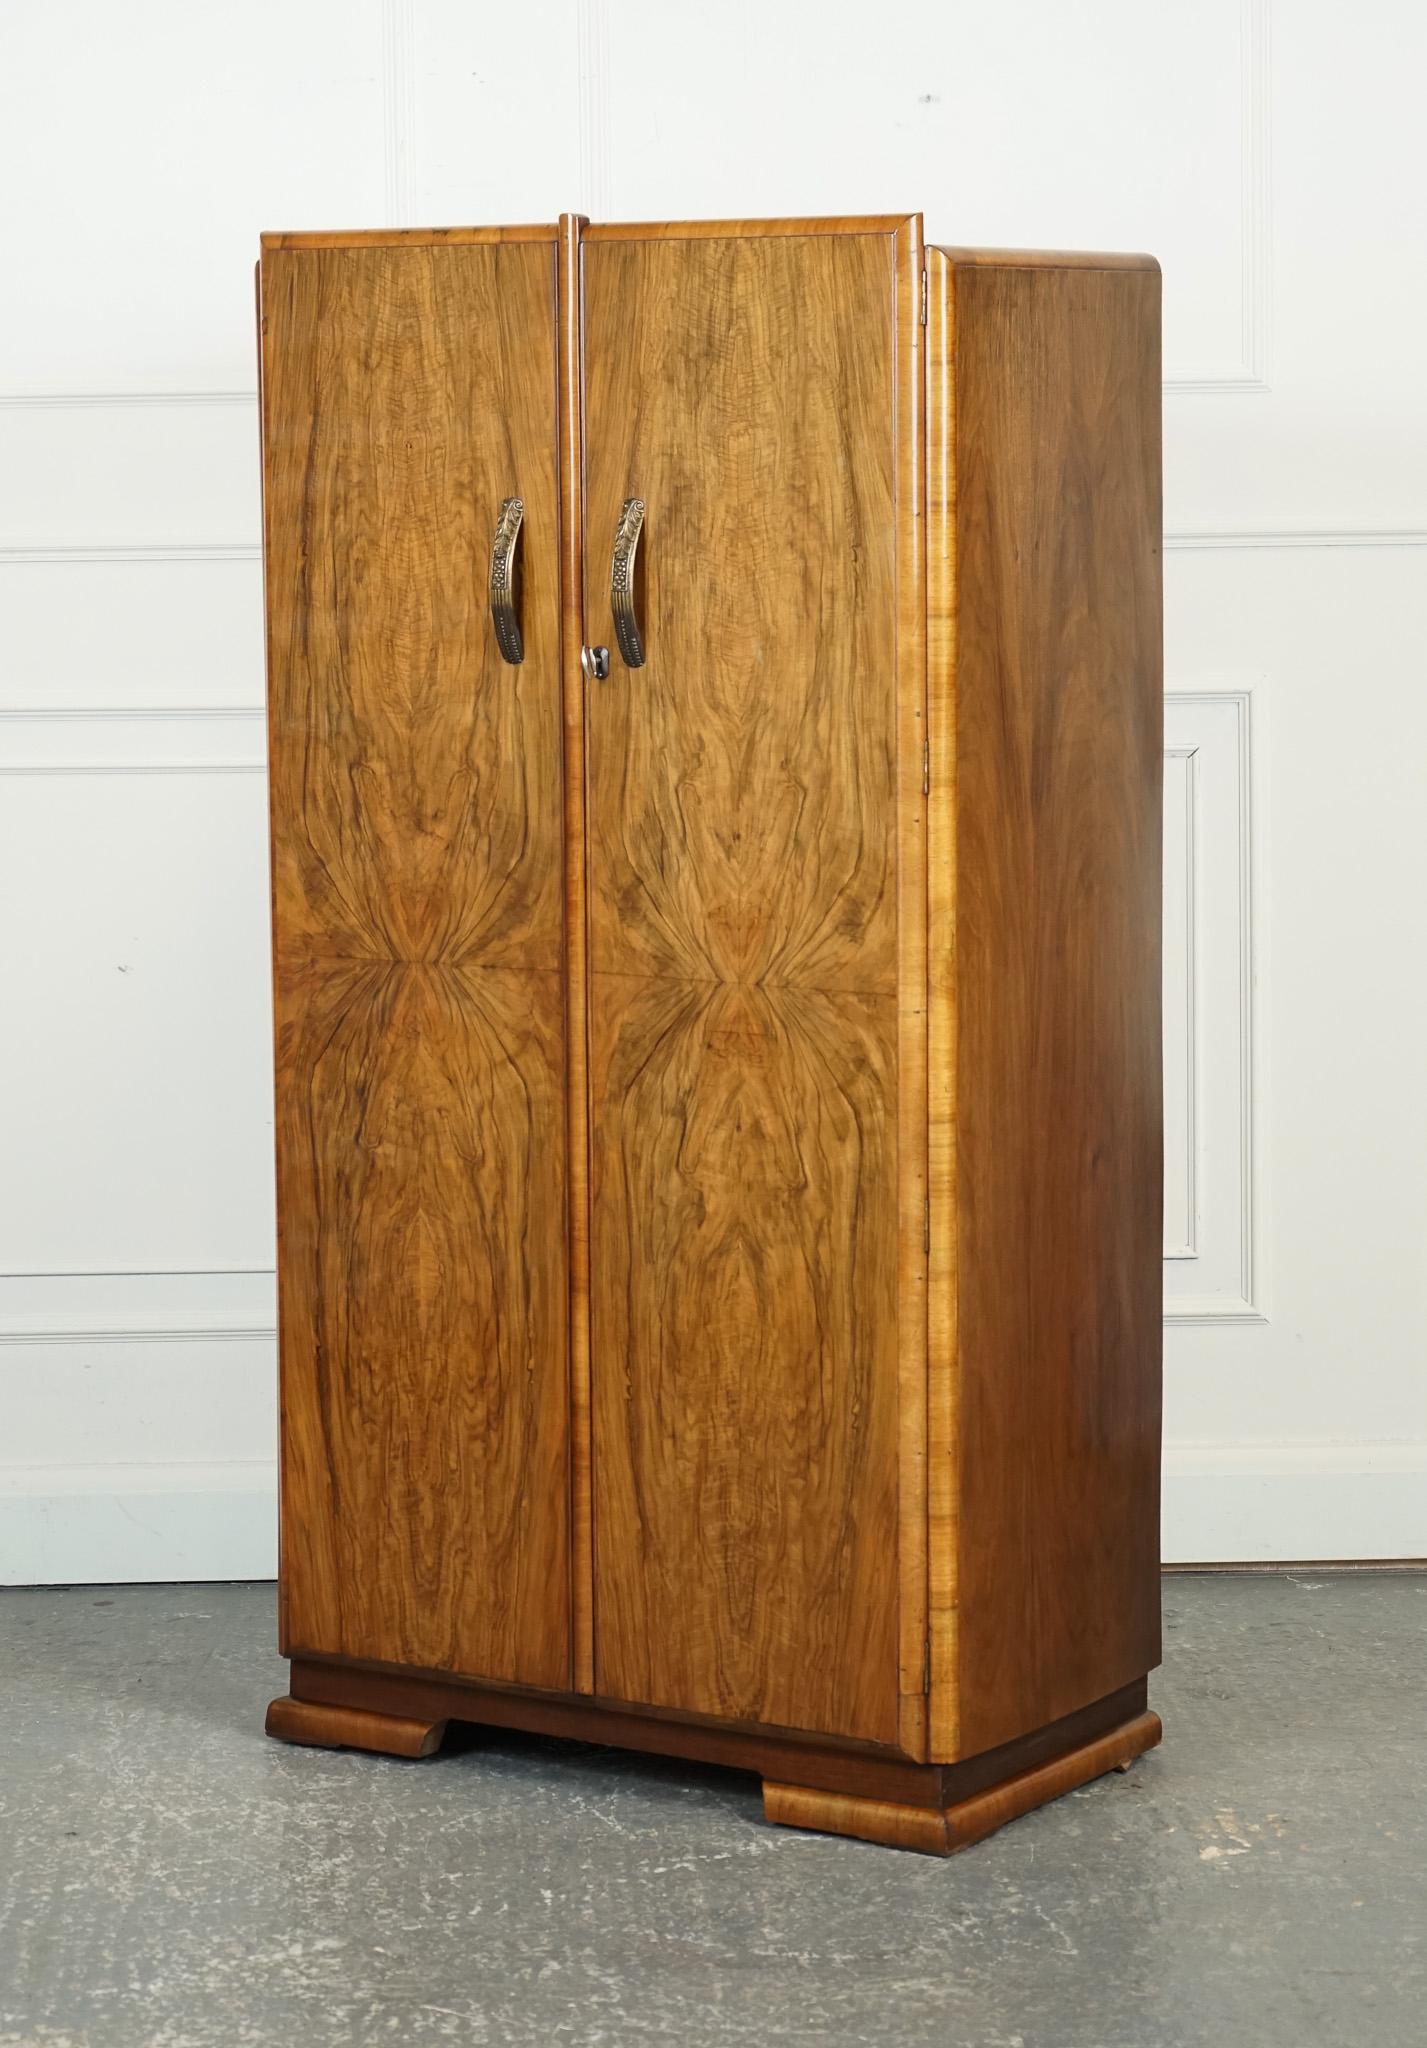 British LOVELY SMALL COMPACT ART DECO BURR WALNuT WARDROBE For Sale